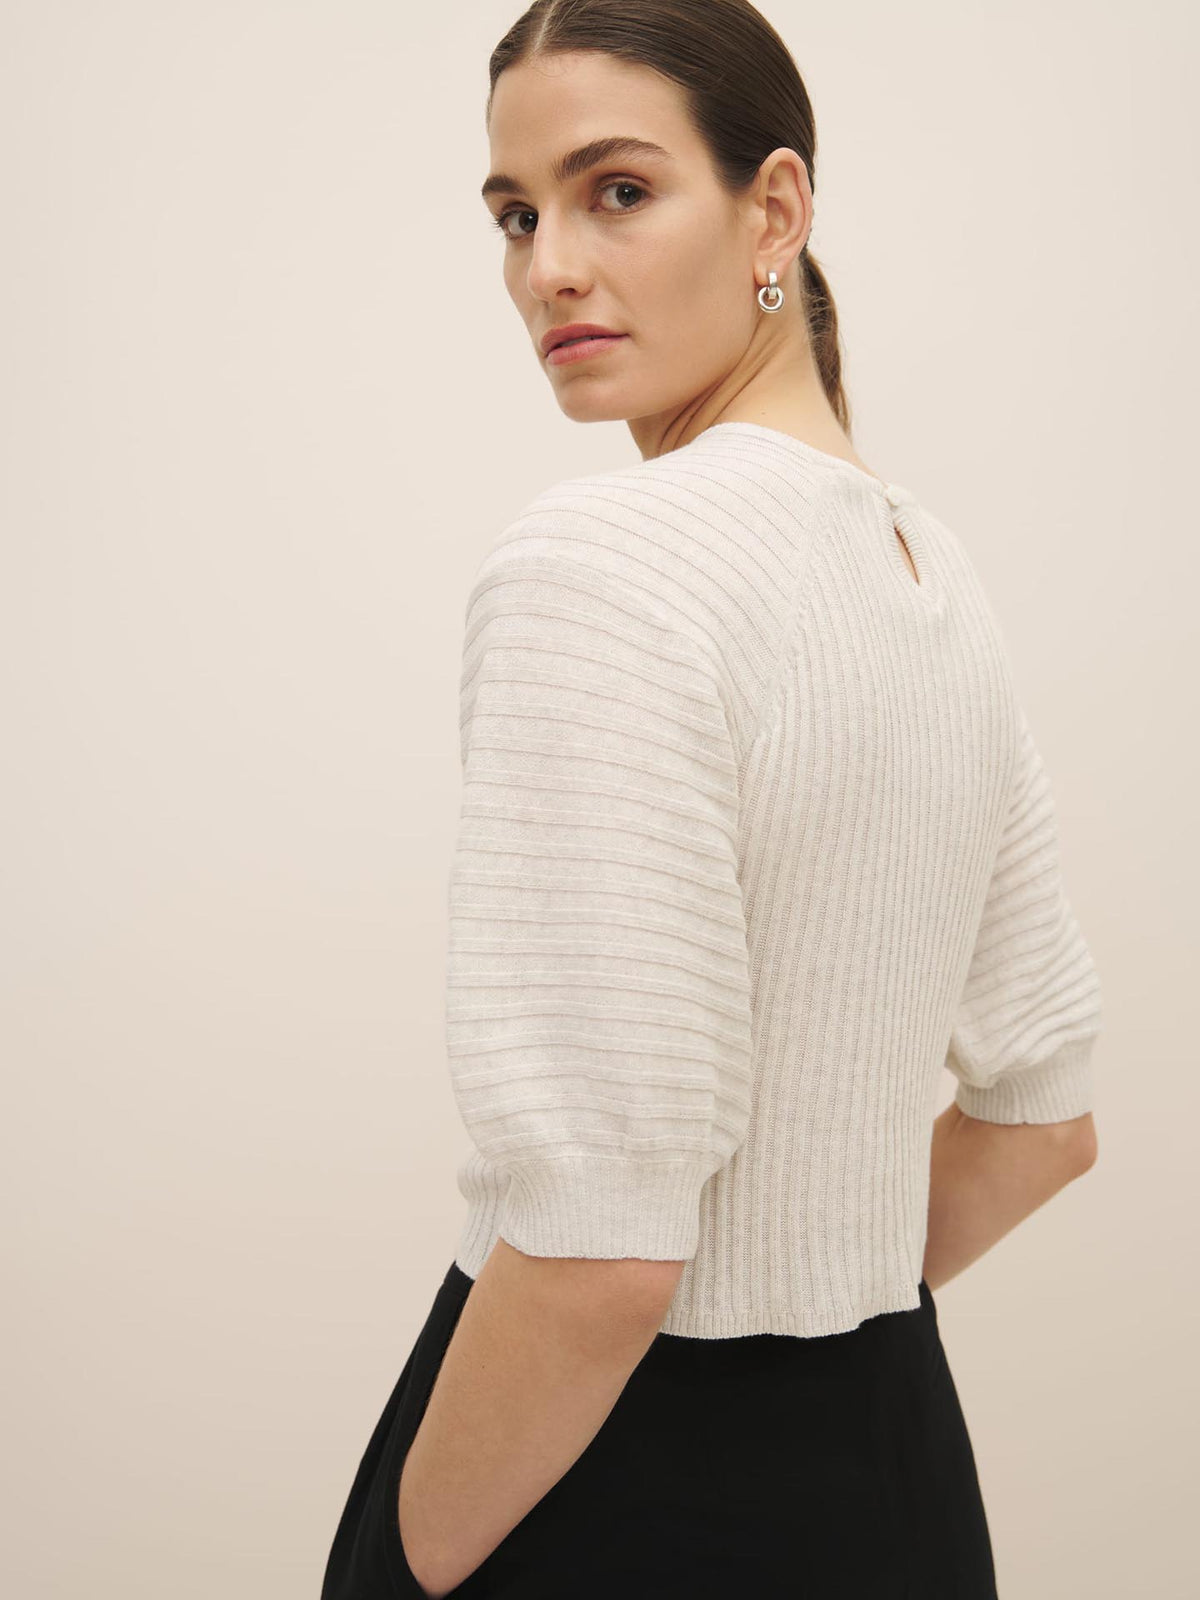 Woman in a Kowtow Quinn Top – Light Marle organic cotton beige striped sweater looking over her shoulder.